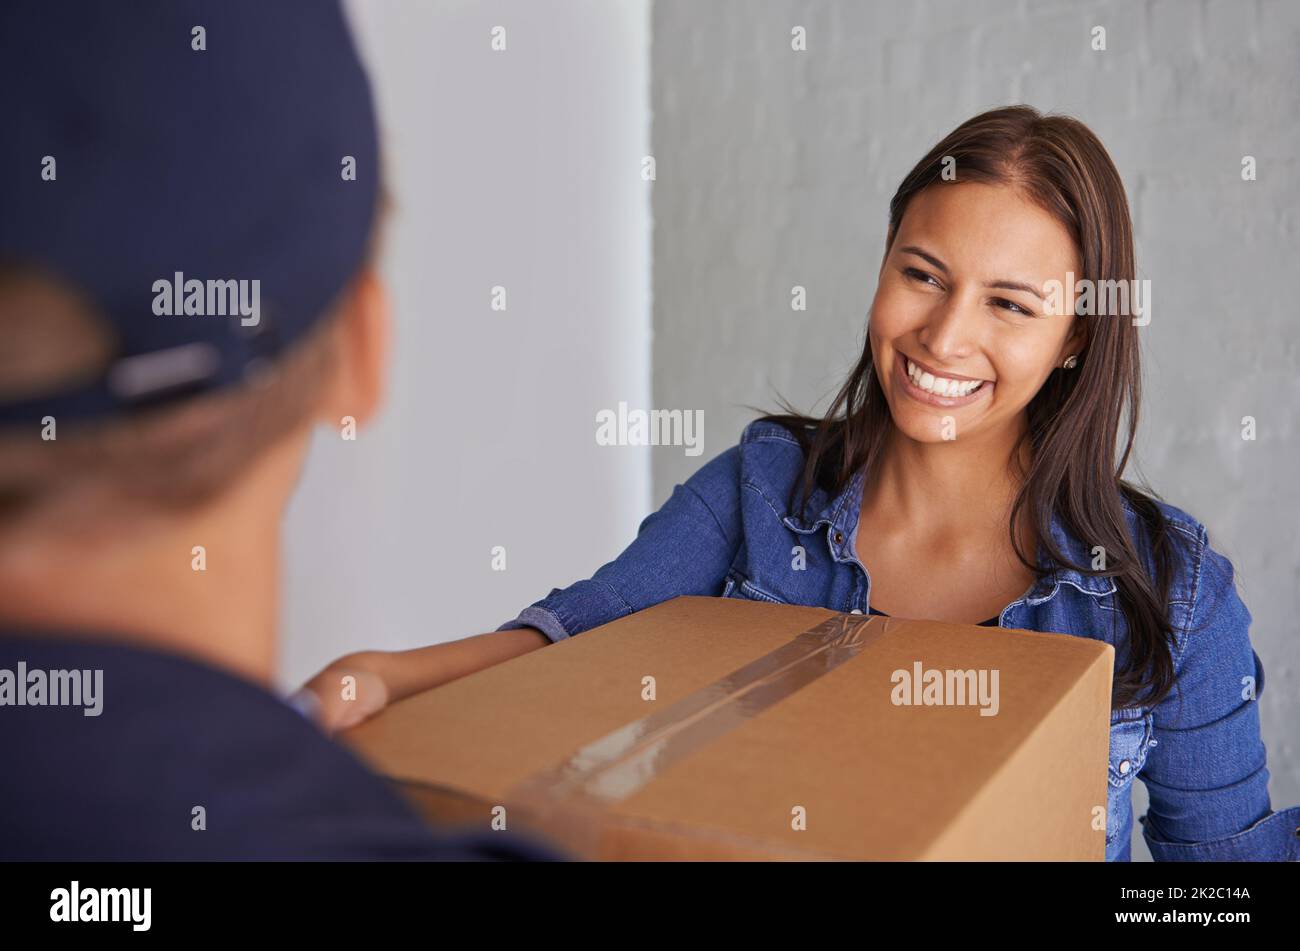 Always find a trustworthy moving company. A beautiful young woman smiling at the camera as she takes a box from a mover. Stock Photo